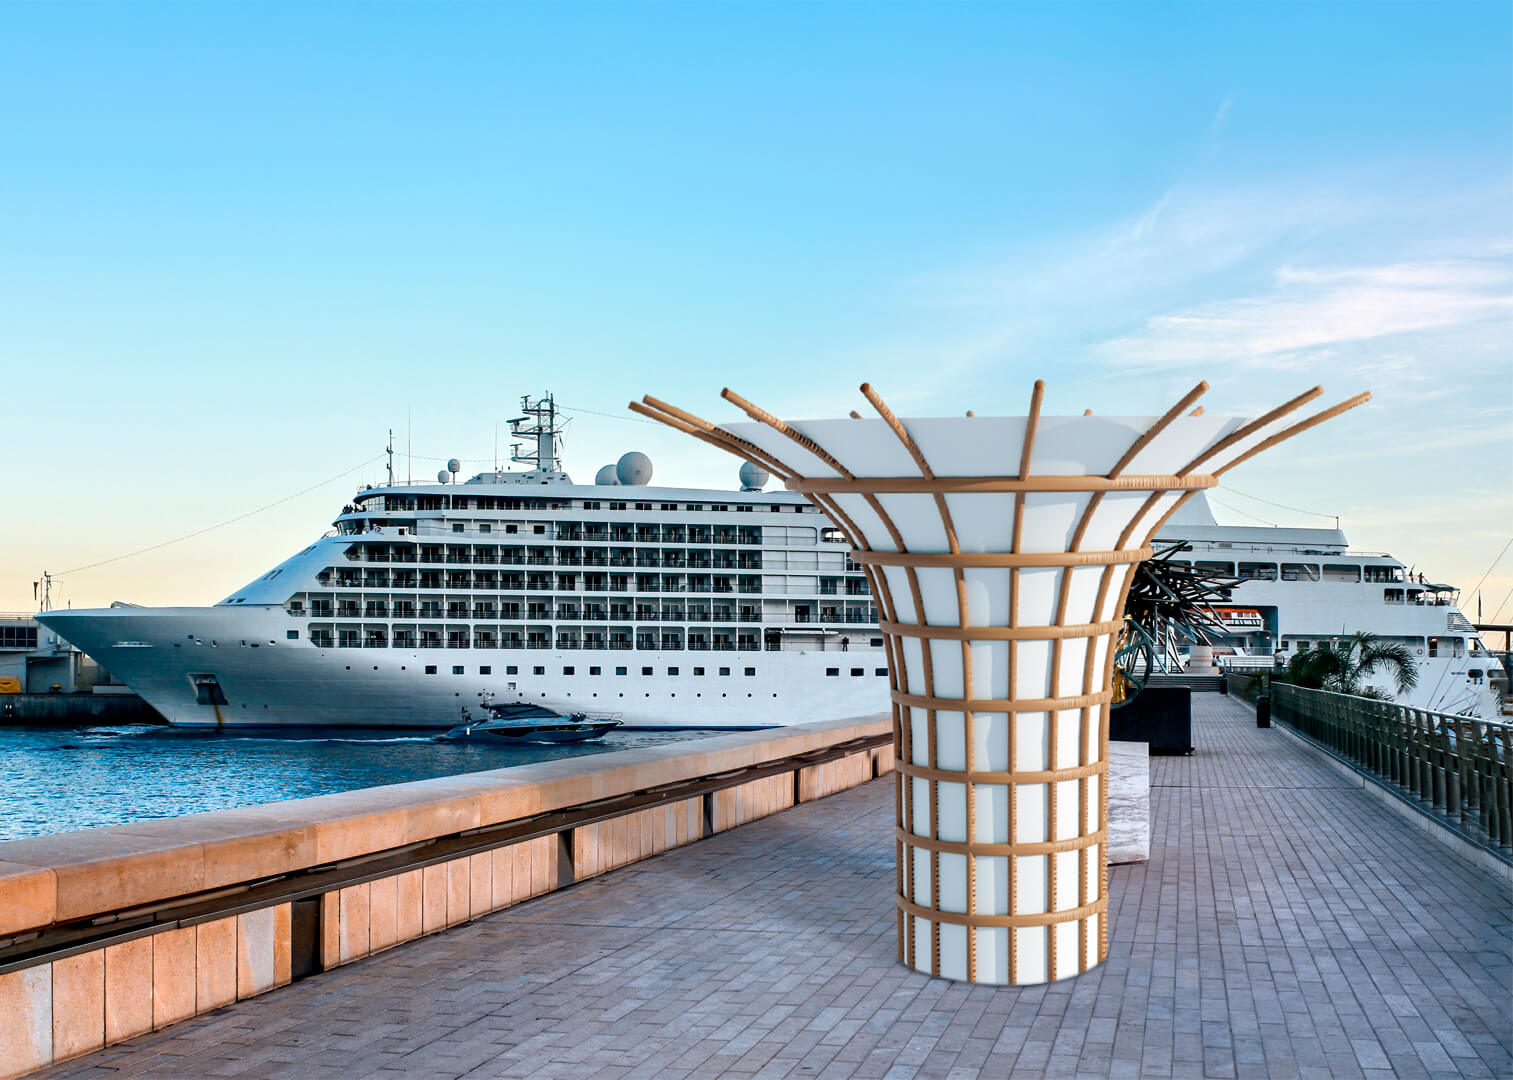 The hub is installed in the port in front of the yacht